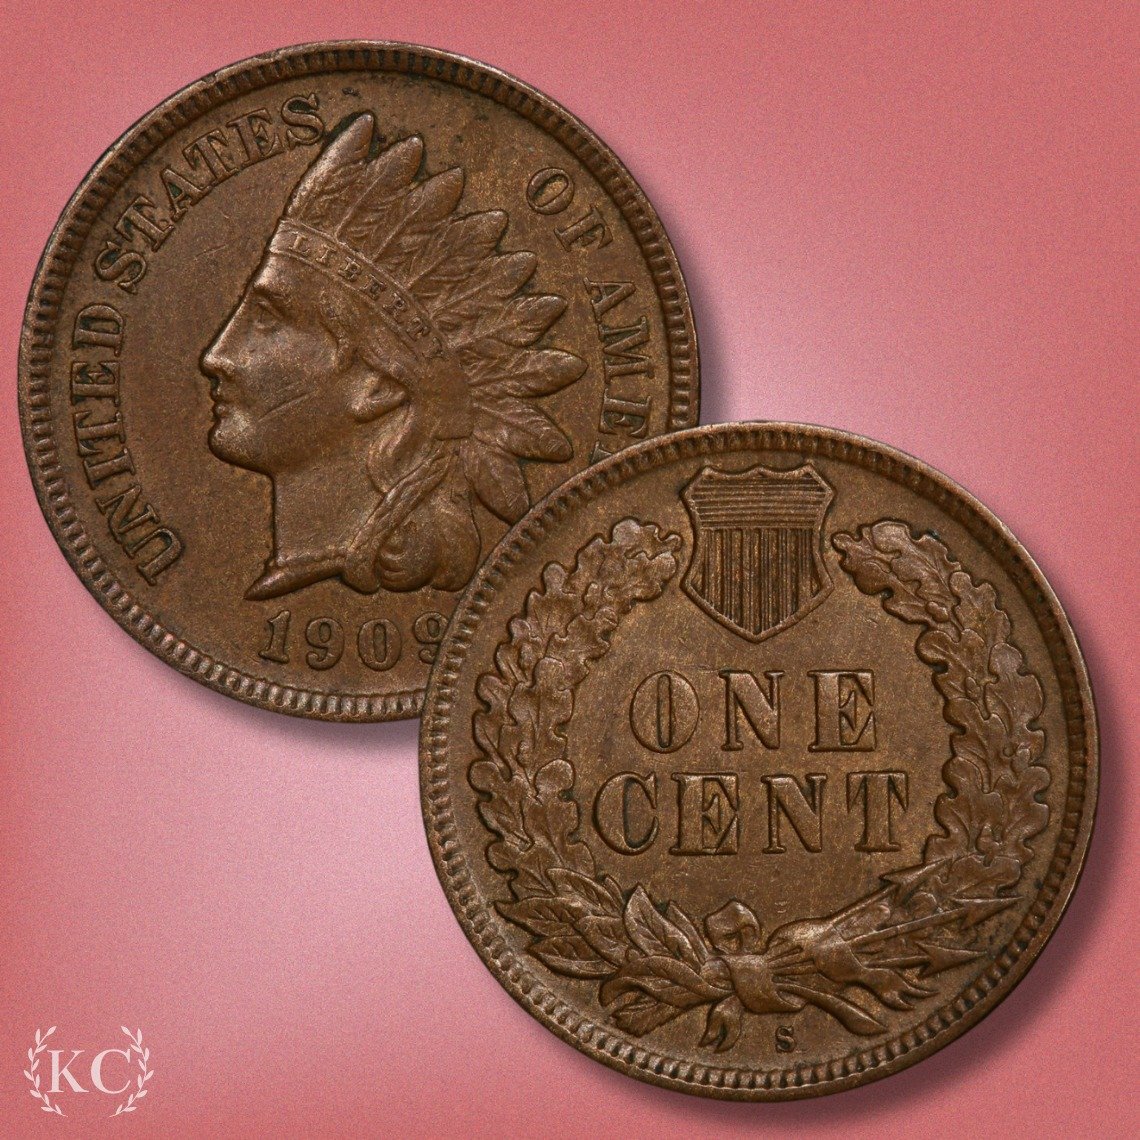 Take a look at this 1909 S PCGC AU55 Indian Head Penny! Add it to your collection today!

#Rare #Coins #PCGS #Collection